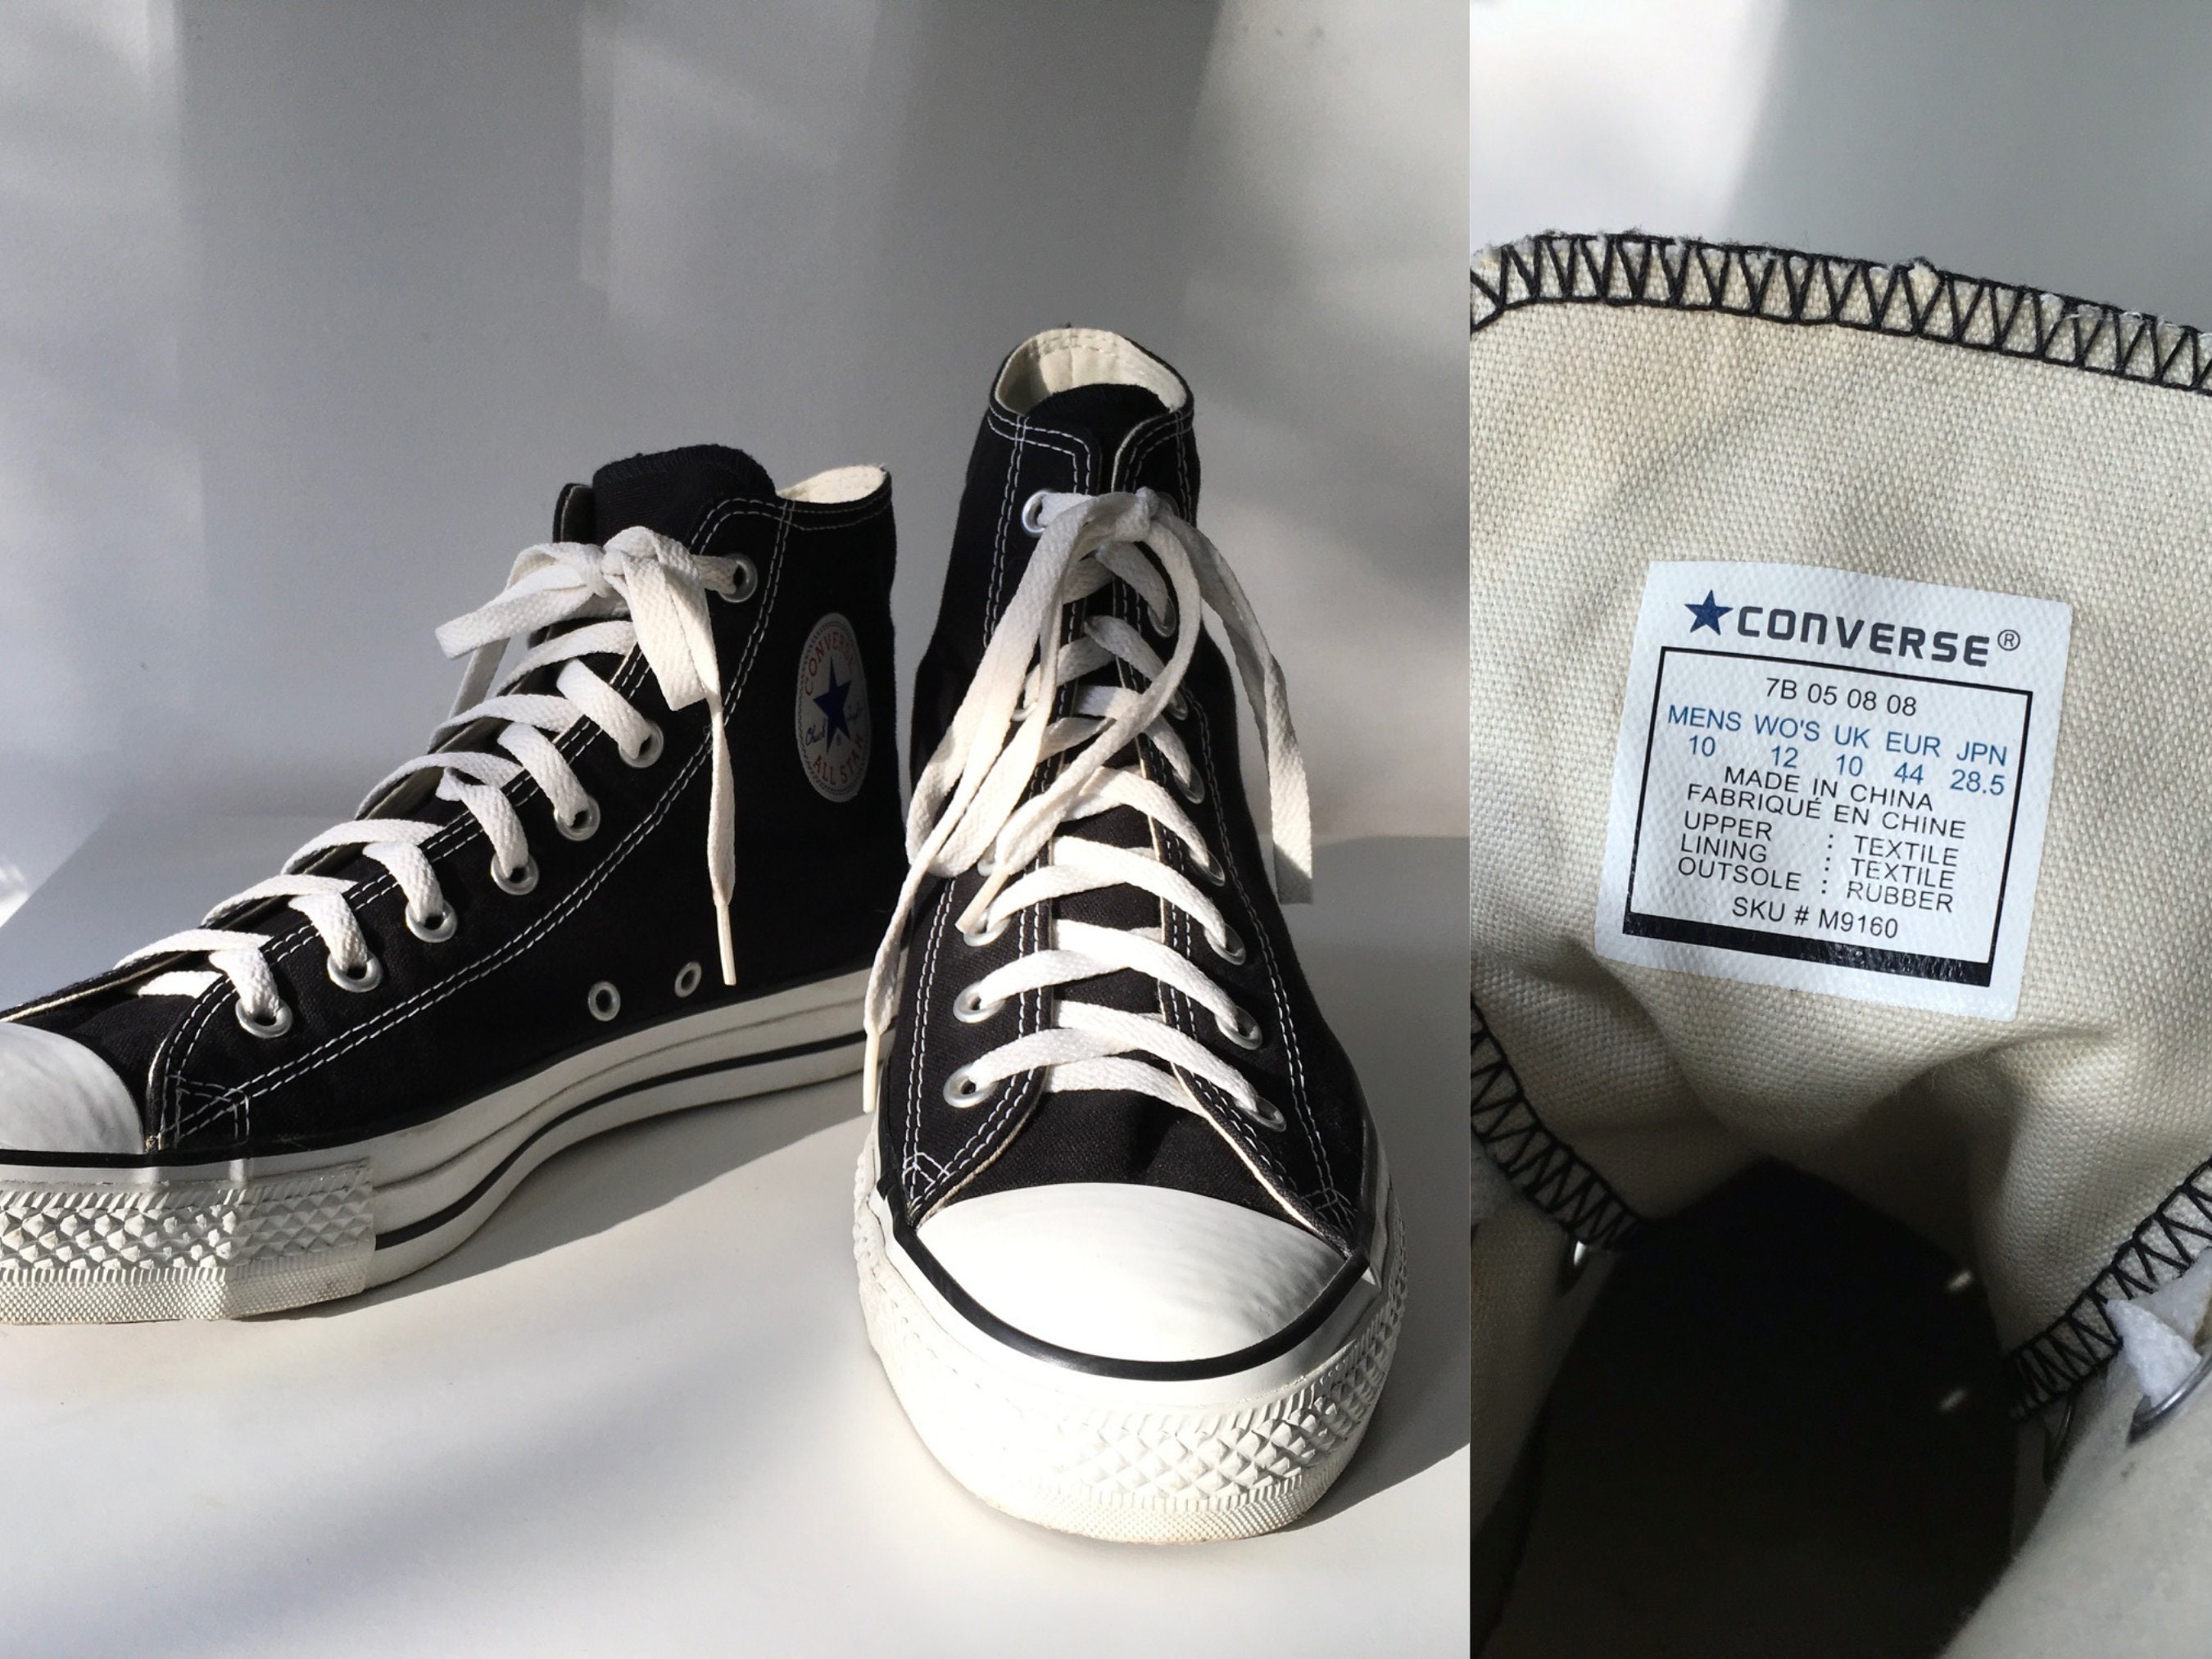 Vintage Converse Chuck Taylor All Star High Tops 2000s - Etsy